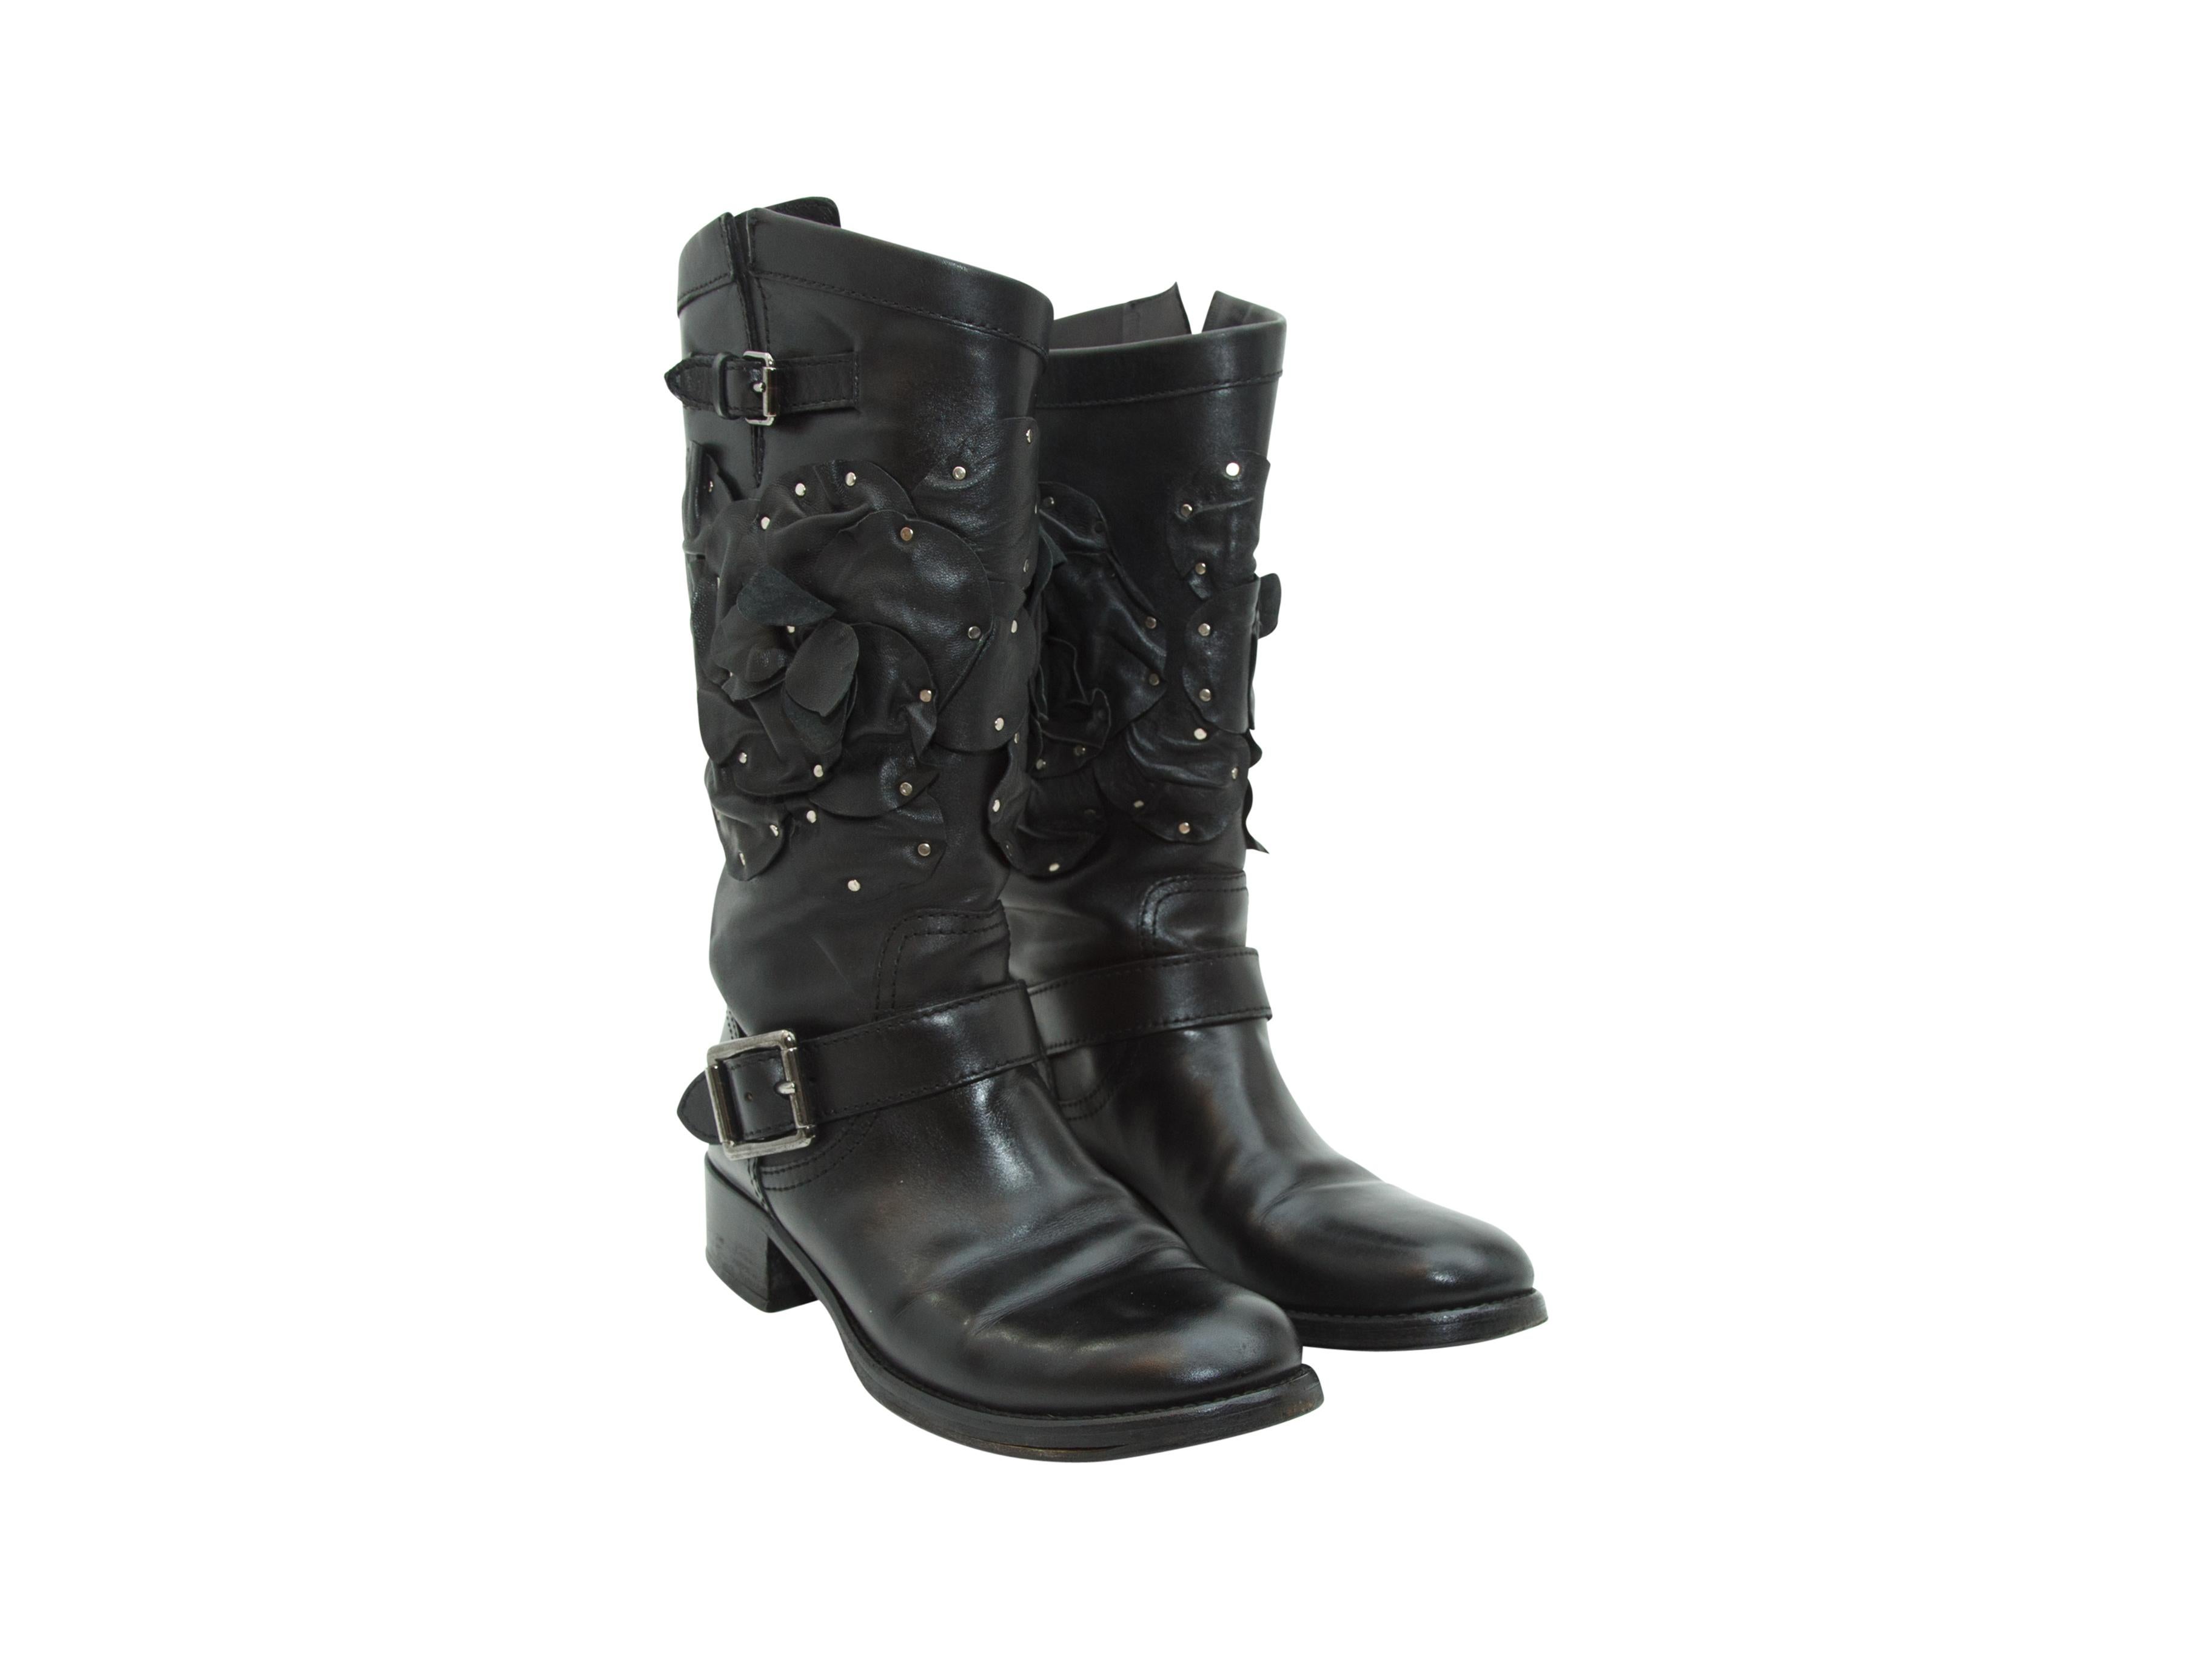 Product details:  Black tall leather boots by Valentino.  Accented with floral applique and flat studs.  Buckle strap accents.  Low stacked heel.  Round toe.  Pull-on style.  Antiqued silvertone hardware.  12.25